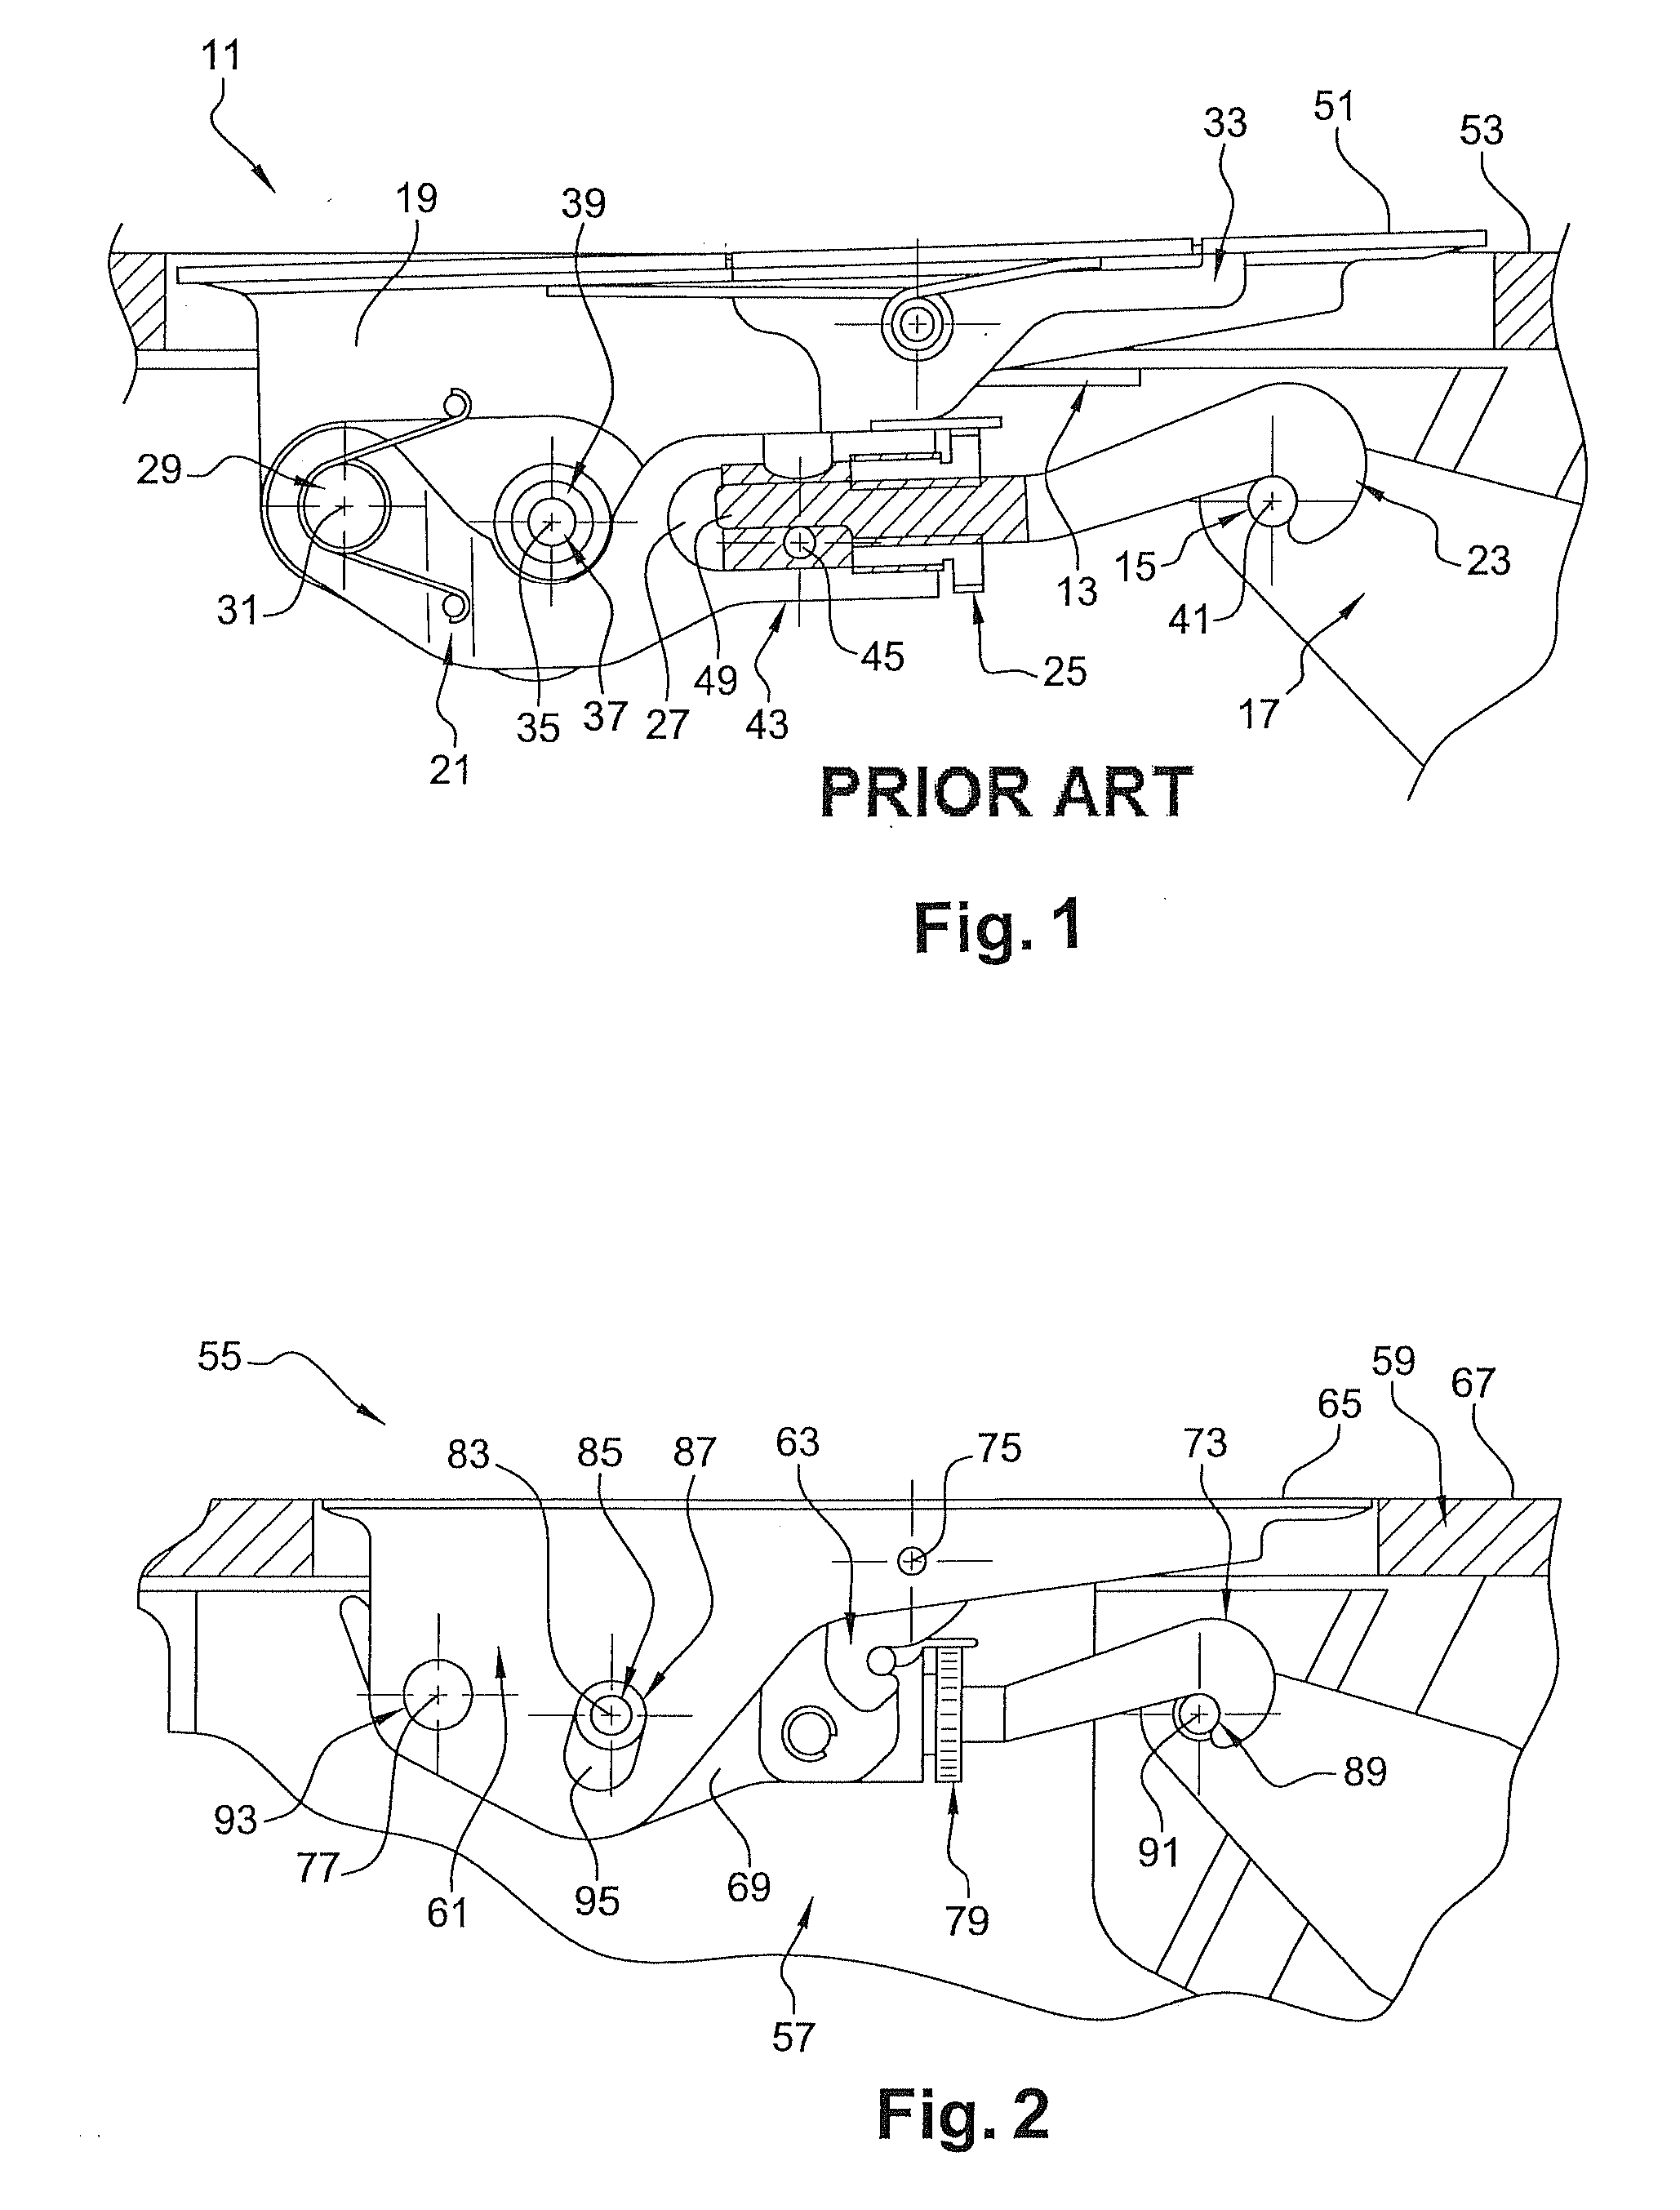 Hook latch fitted with a positioning device and a method for assembling such a latch